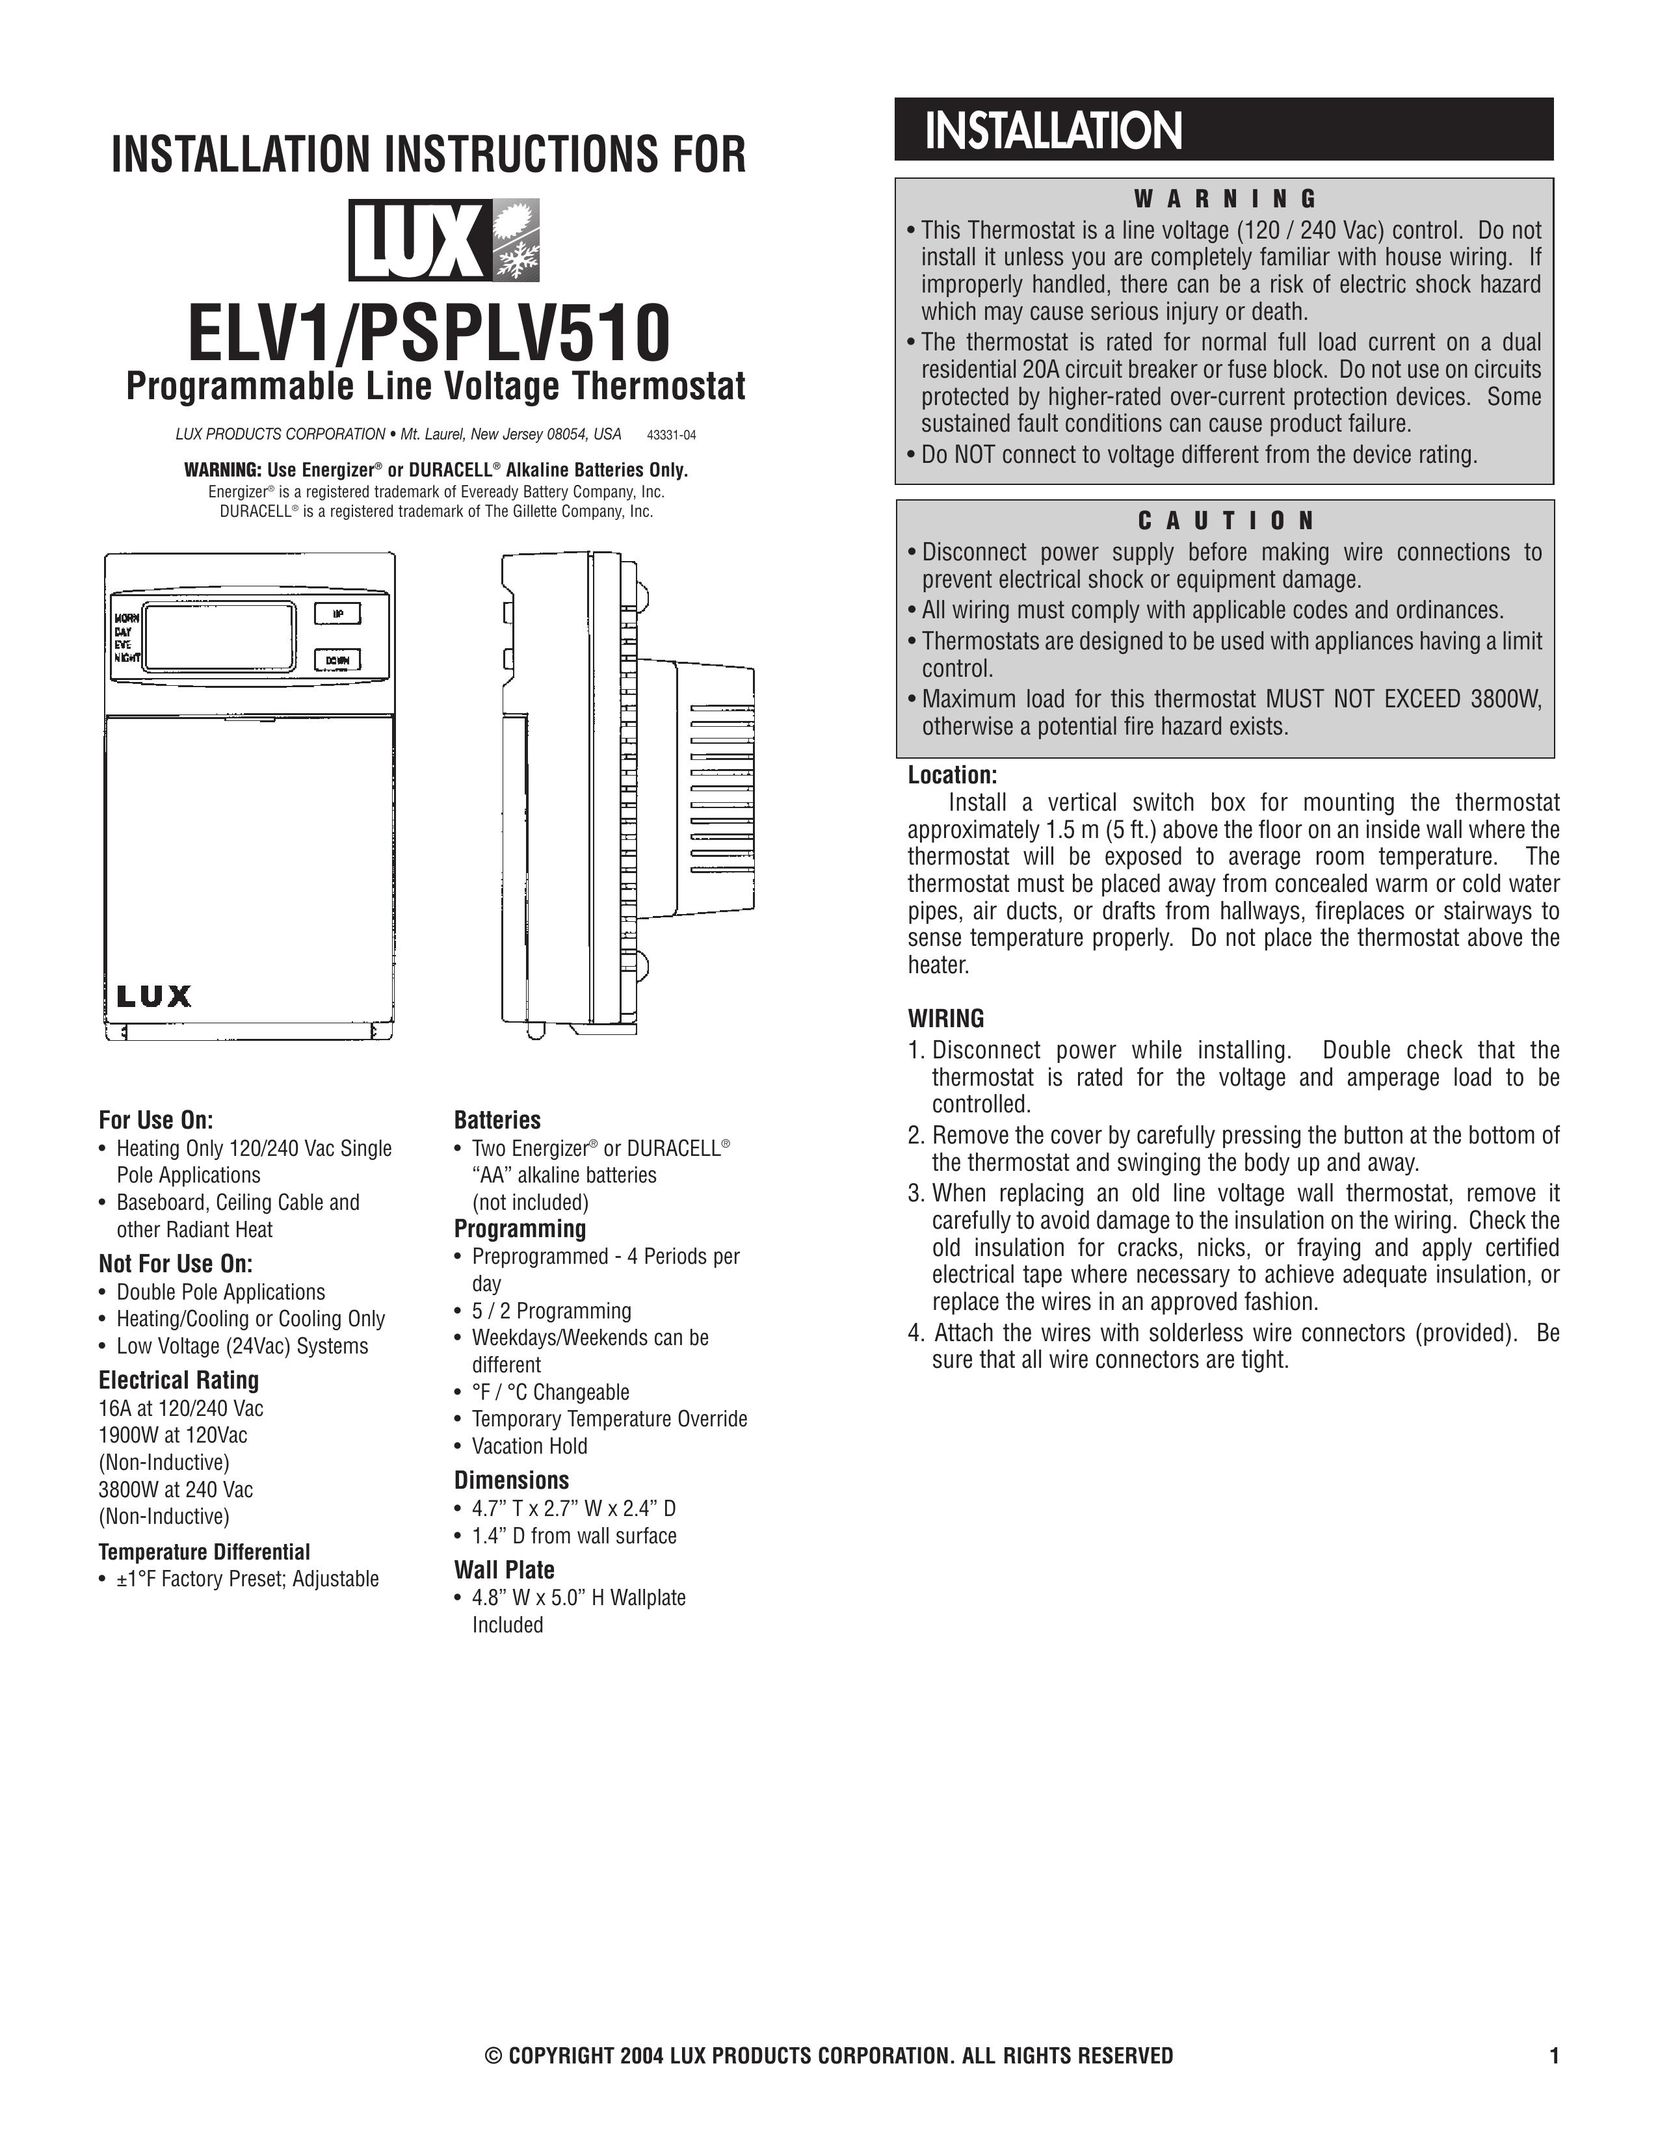 Lux Products ELV1/PSPLV510 Thermostat User Manual